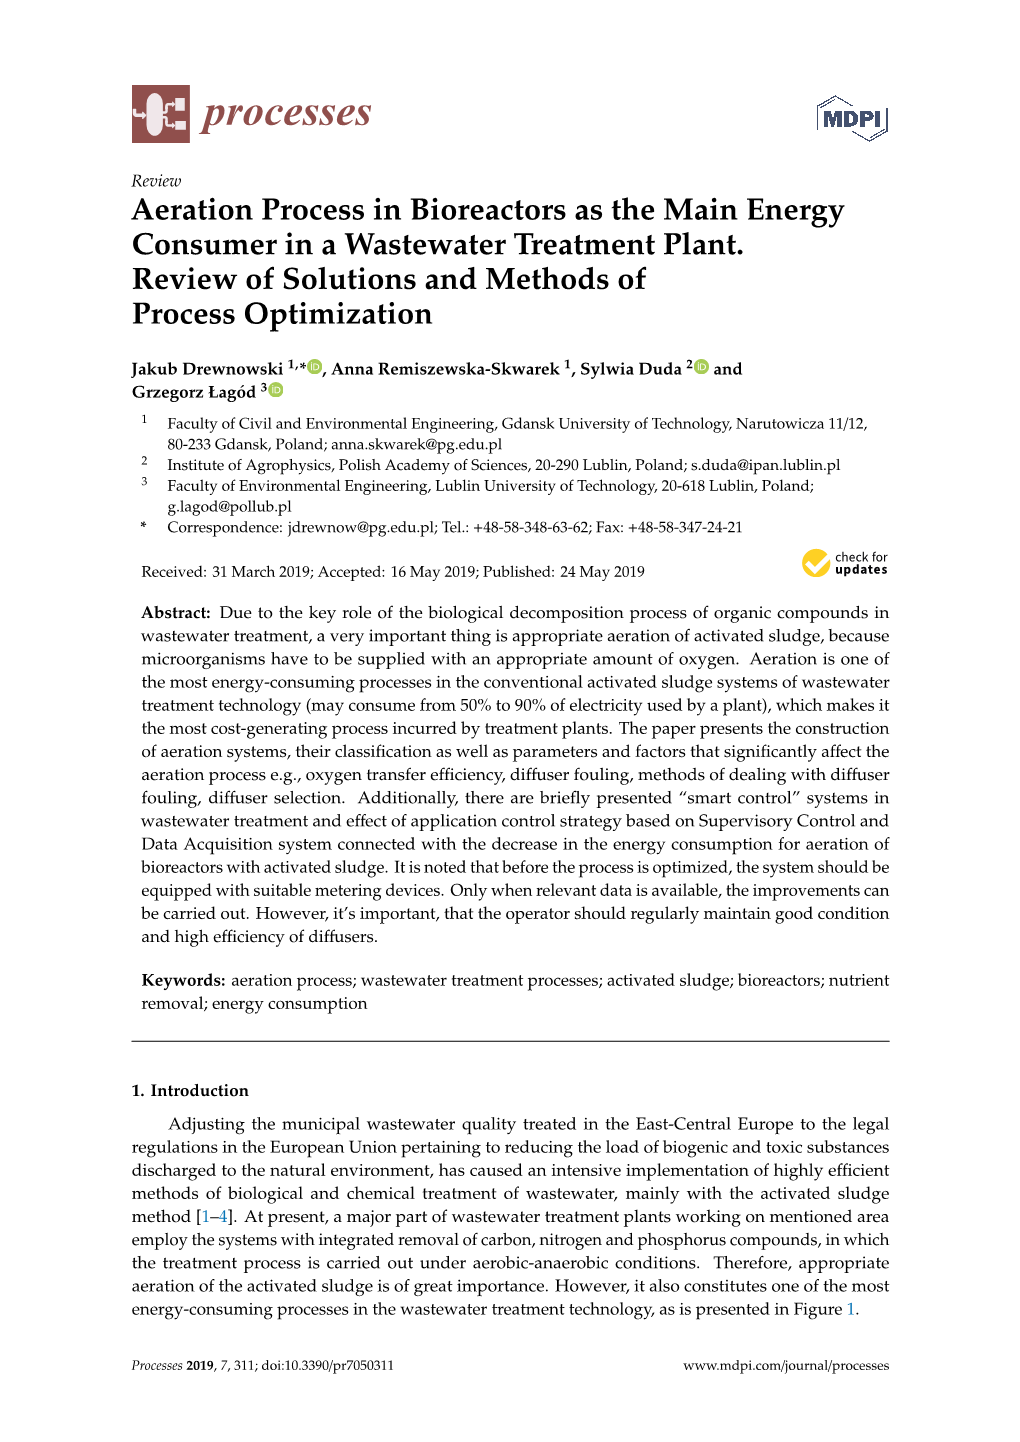 Aeration Process in Bioreactors As the Main Energy Consumer in a Wastewater Treatment Plant